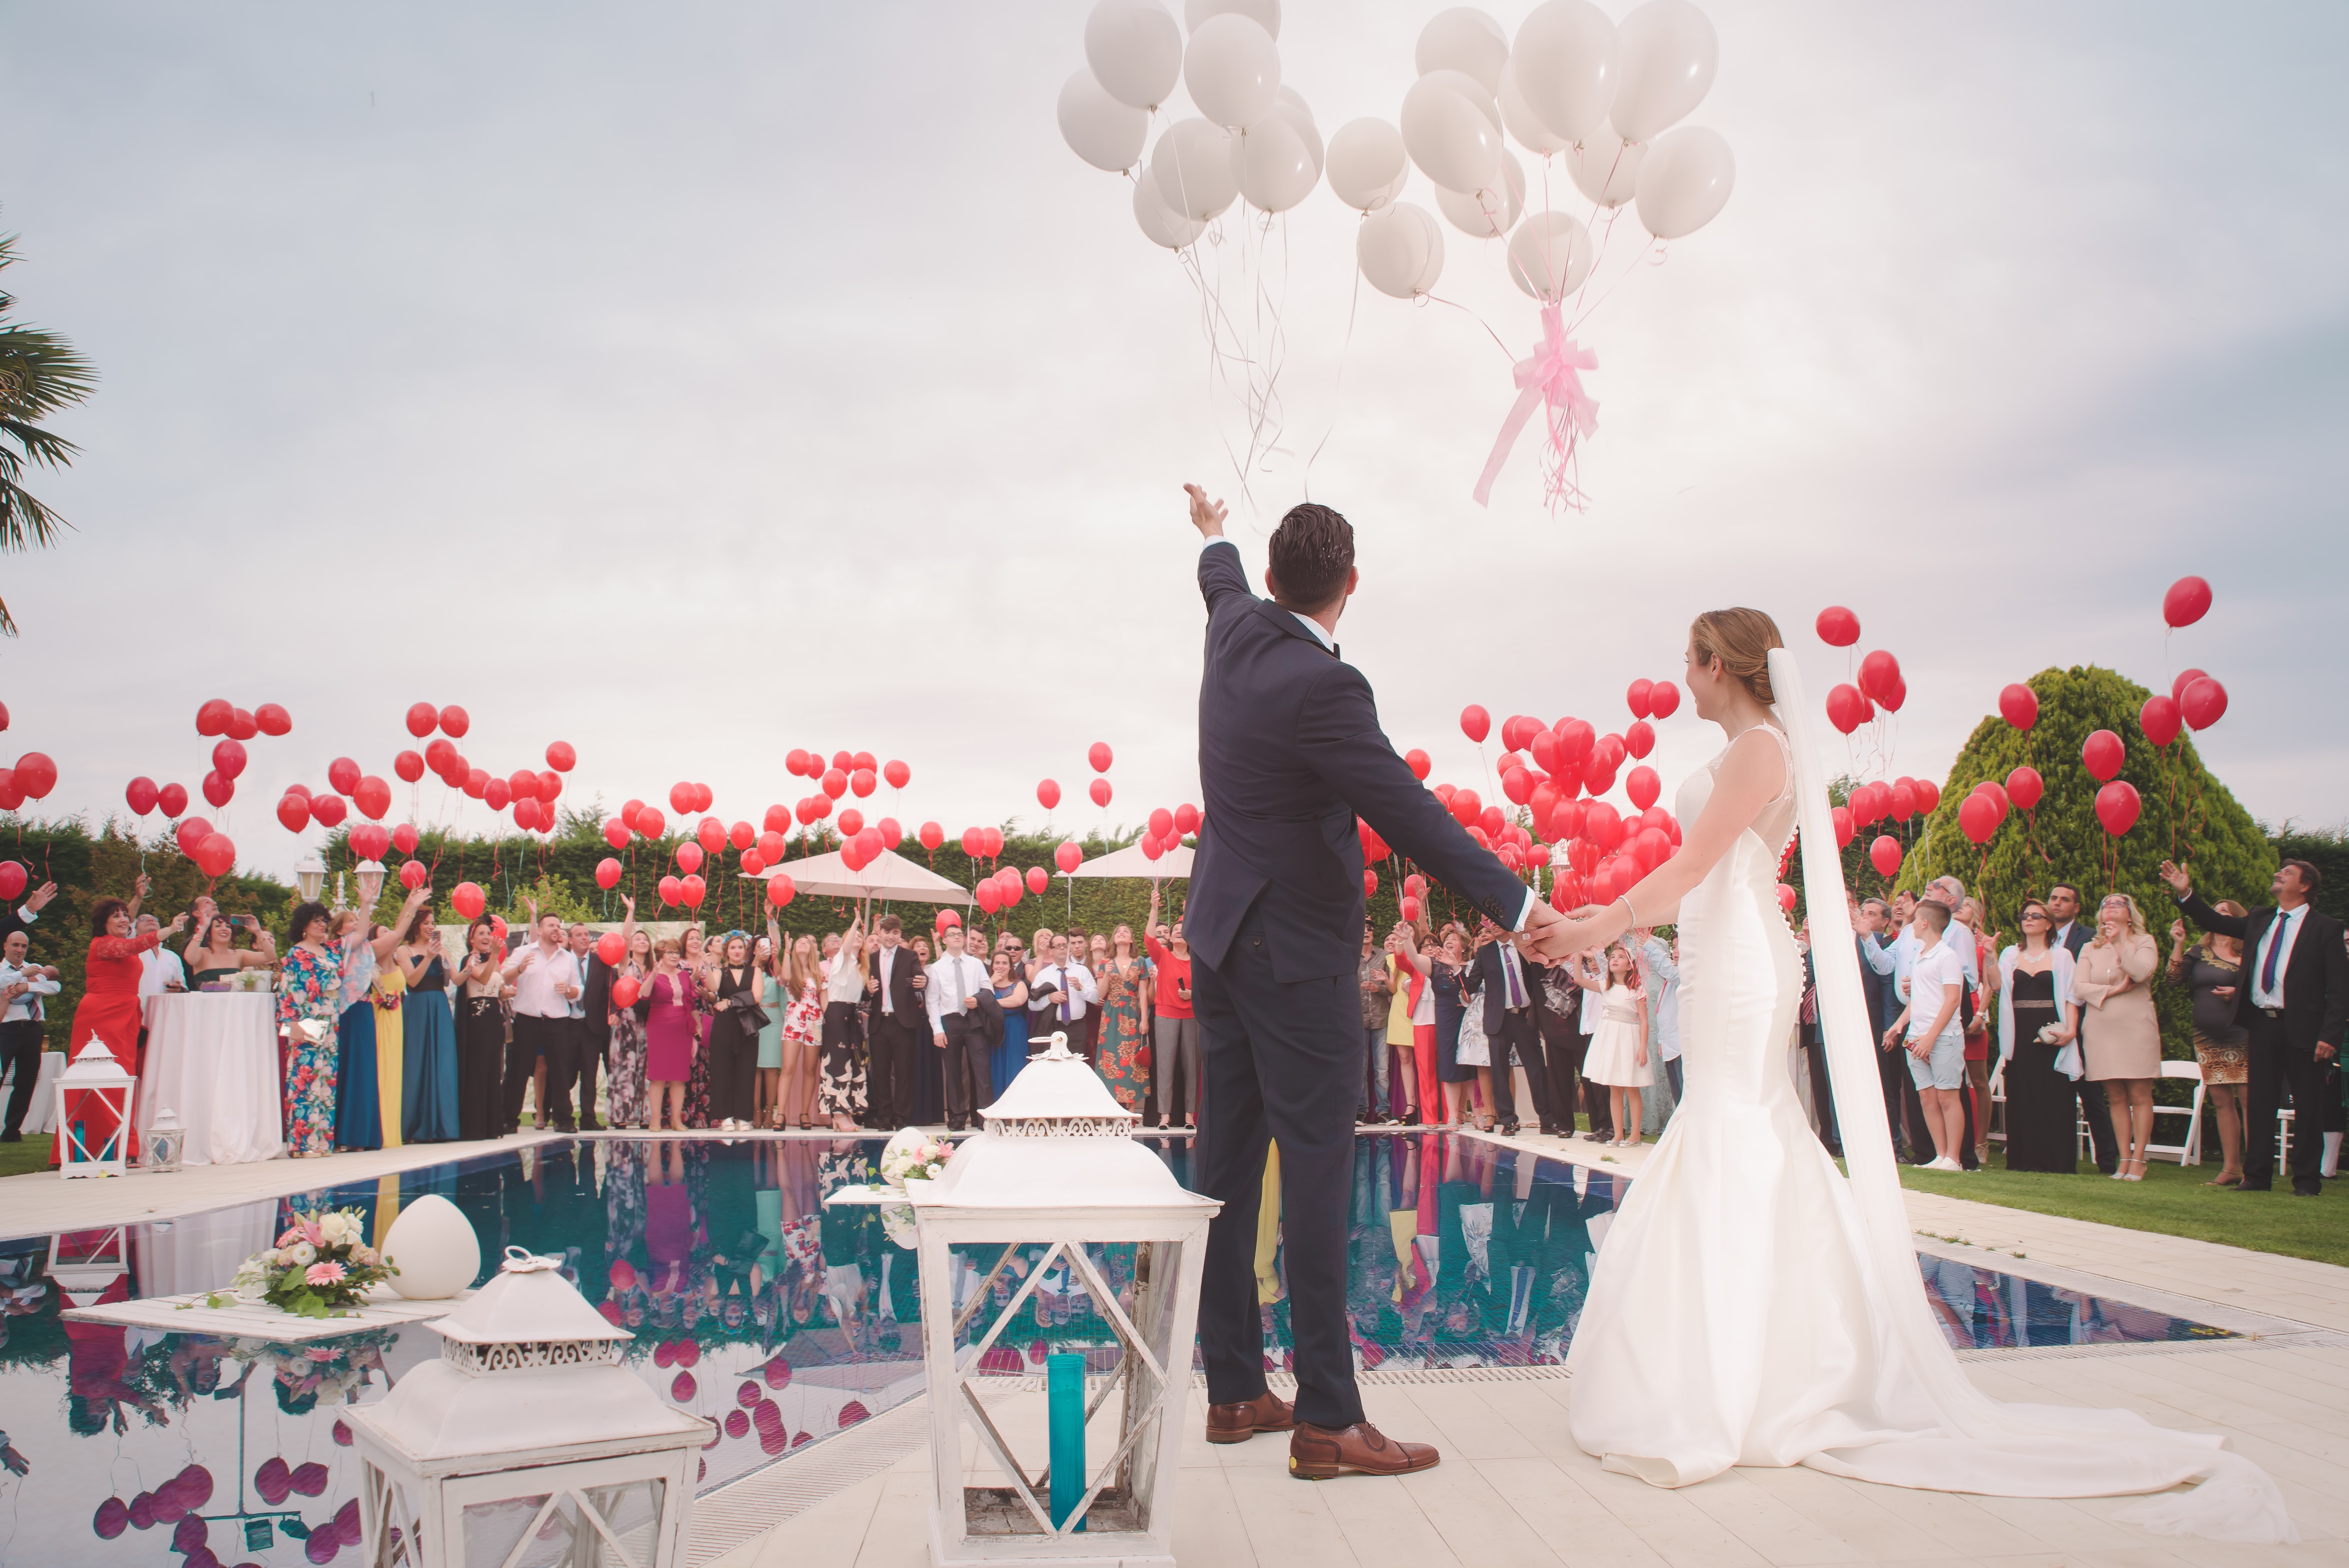 The Guide to Planning Your Dream Wedding After COVID-19